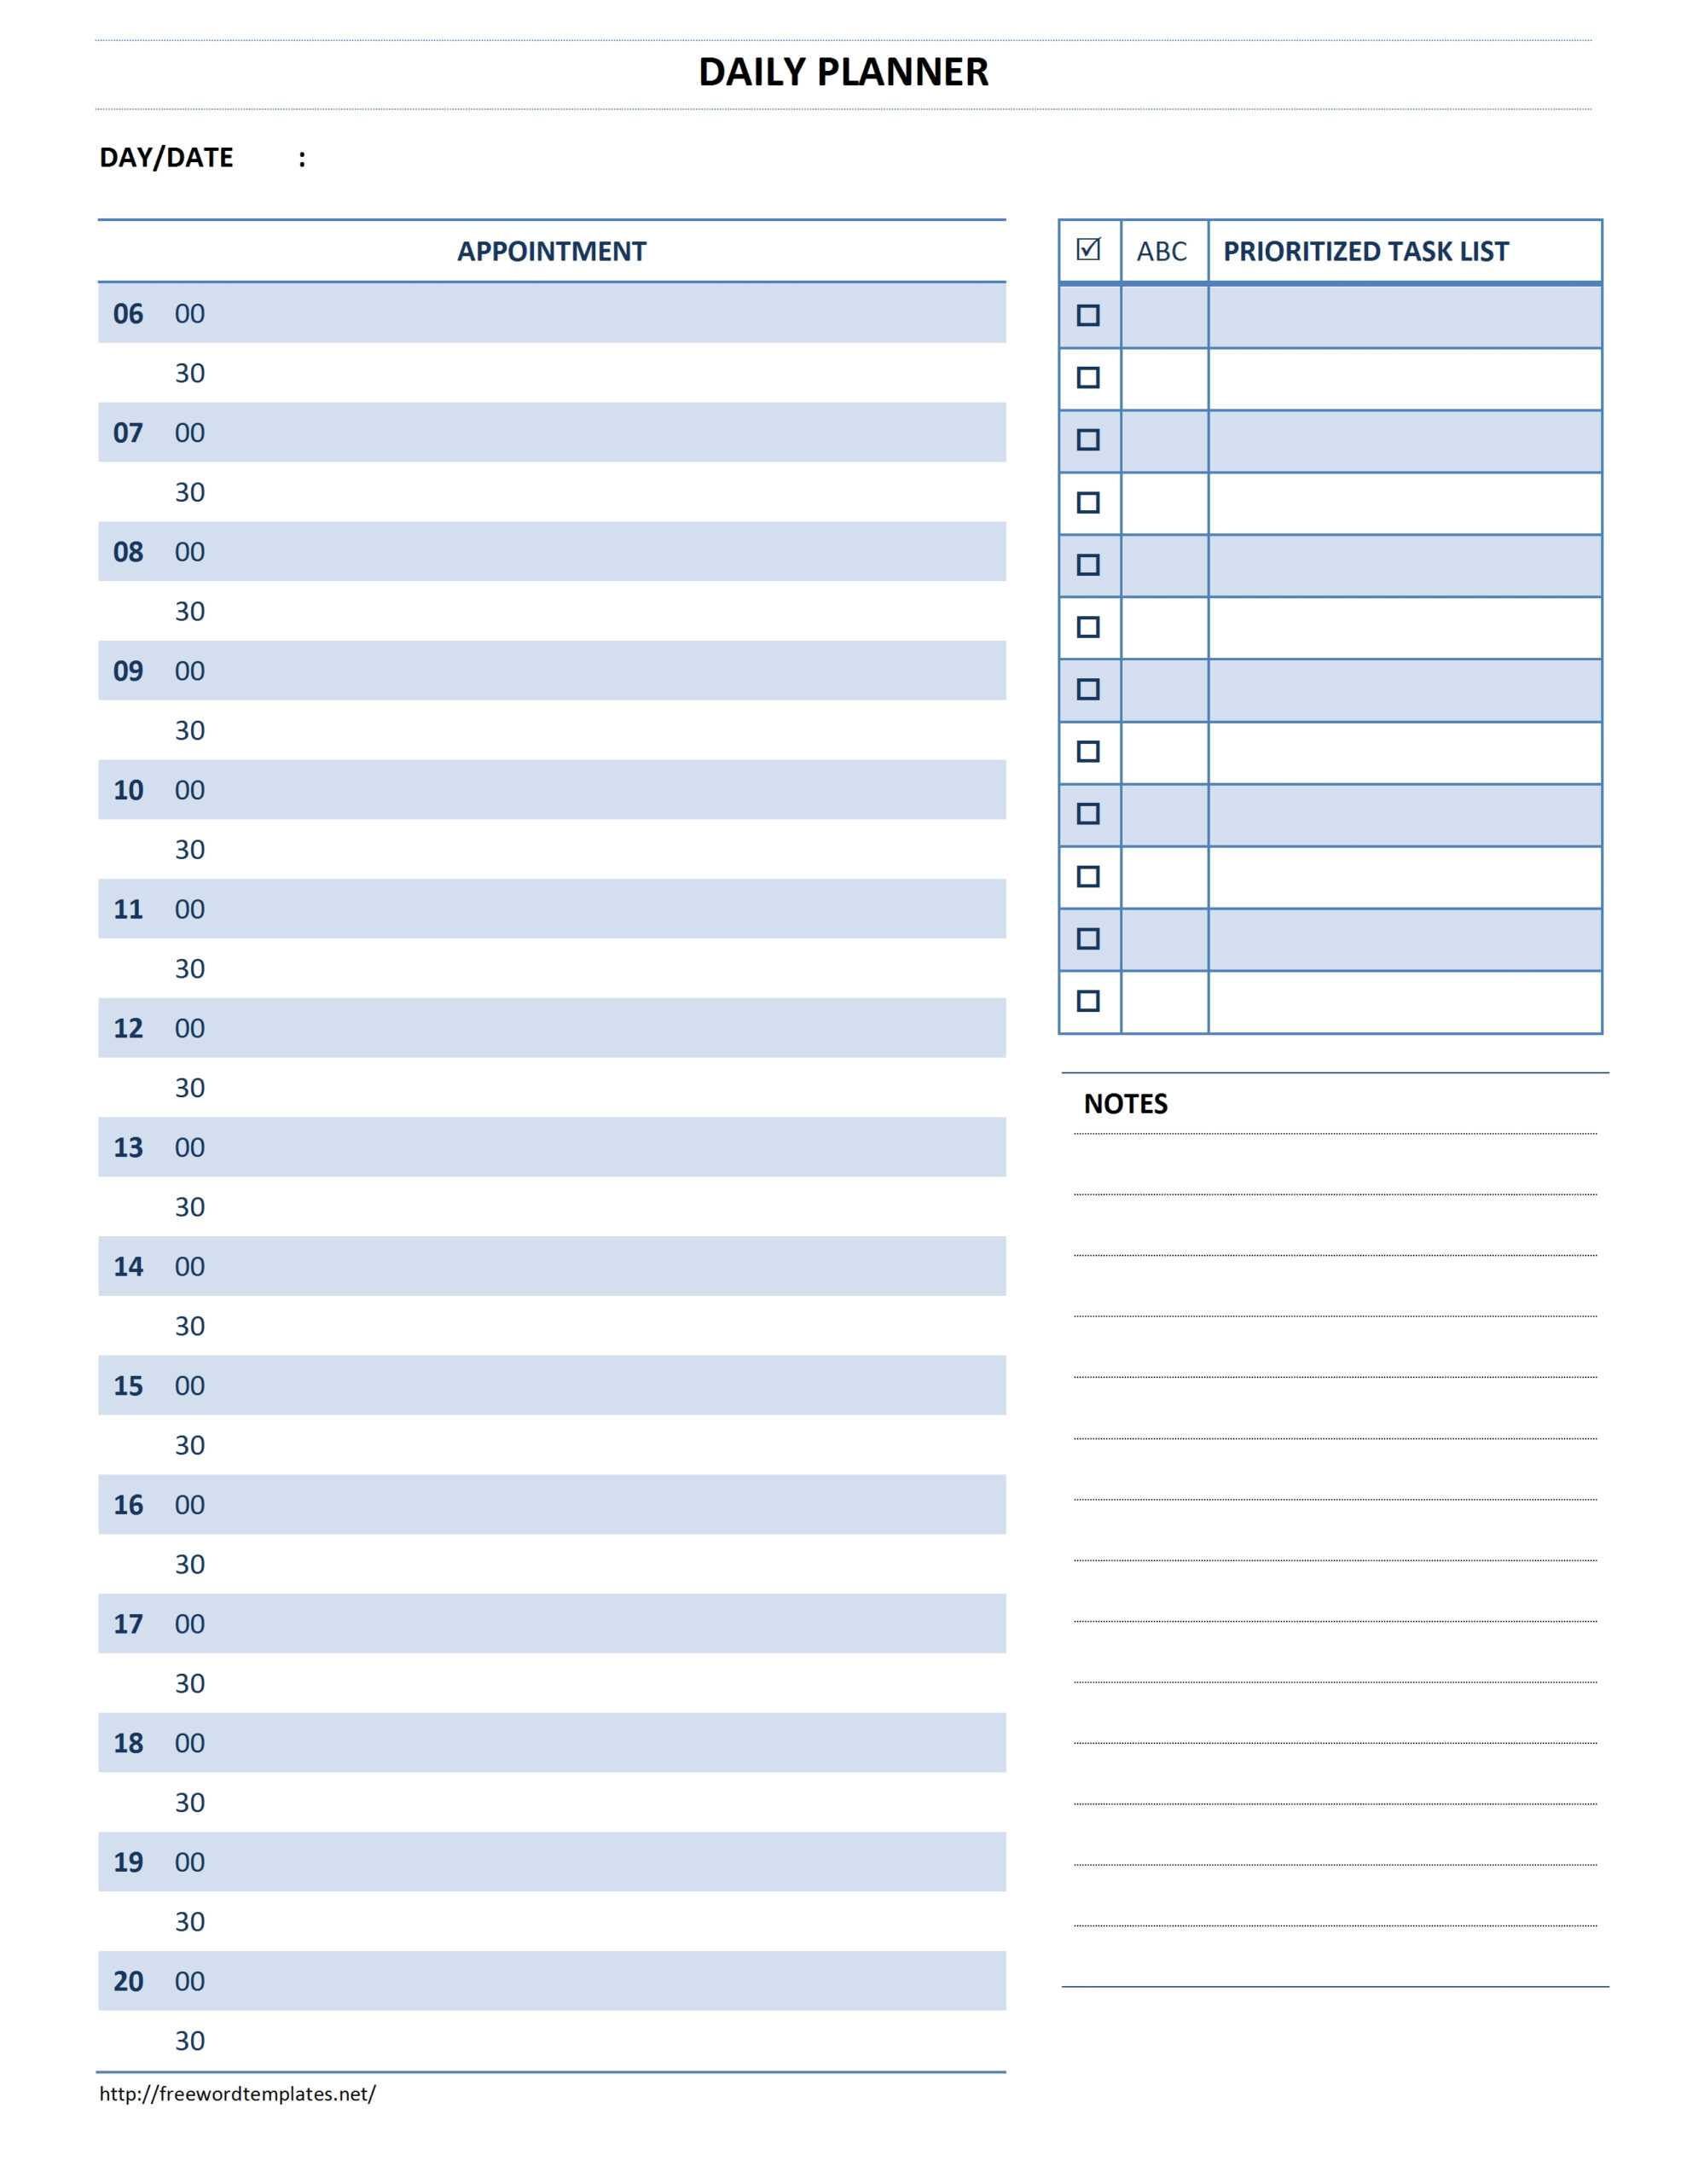 Daily Planner Template Throughout Appointment Sheet Template Word